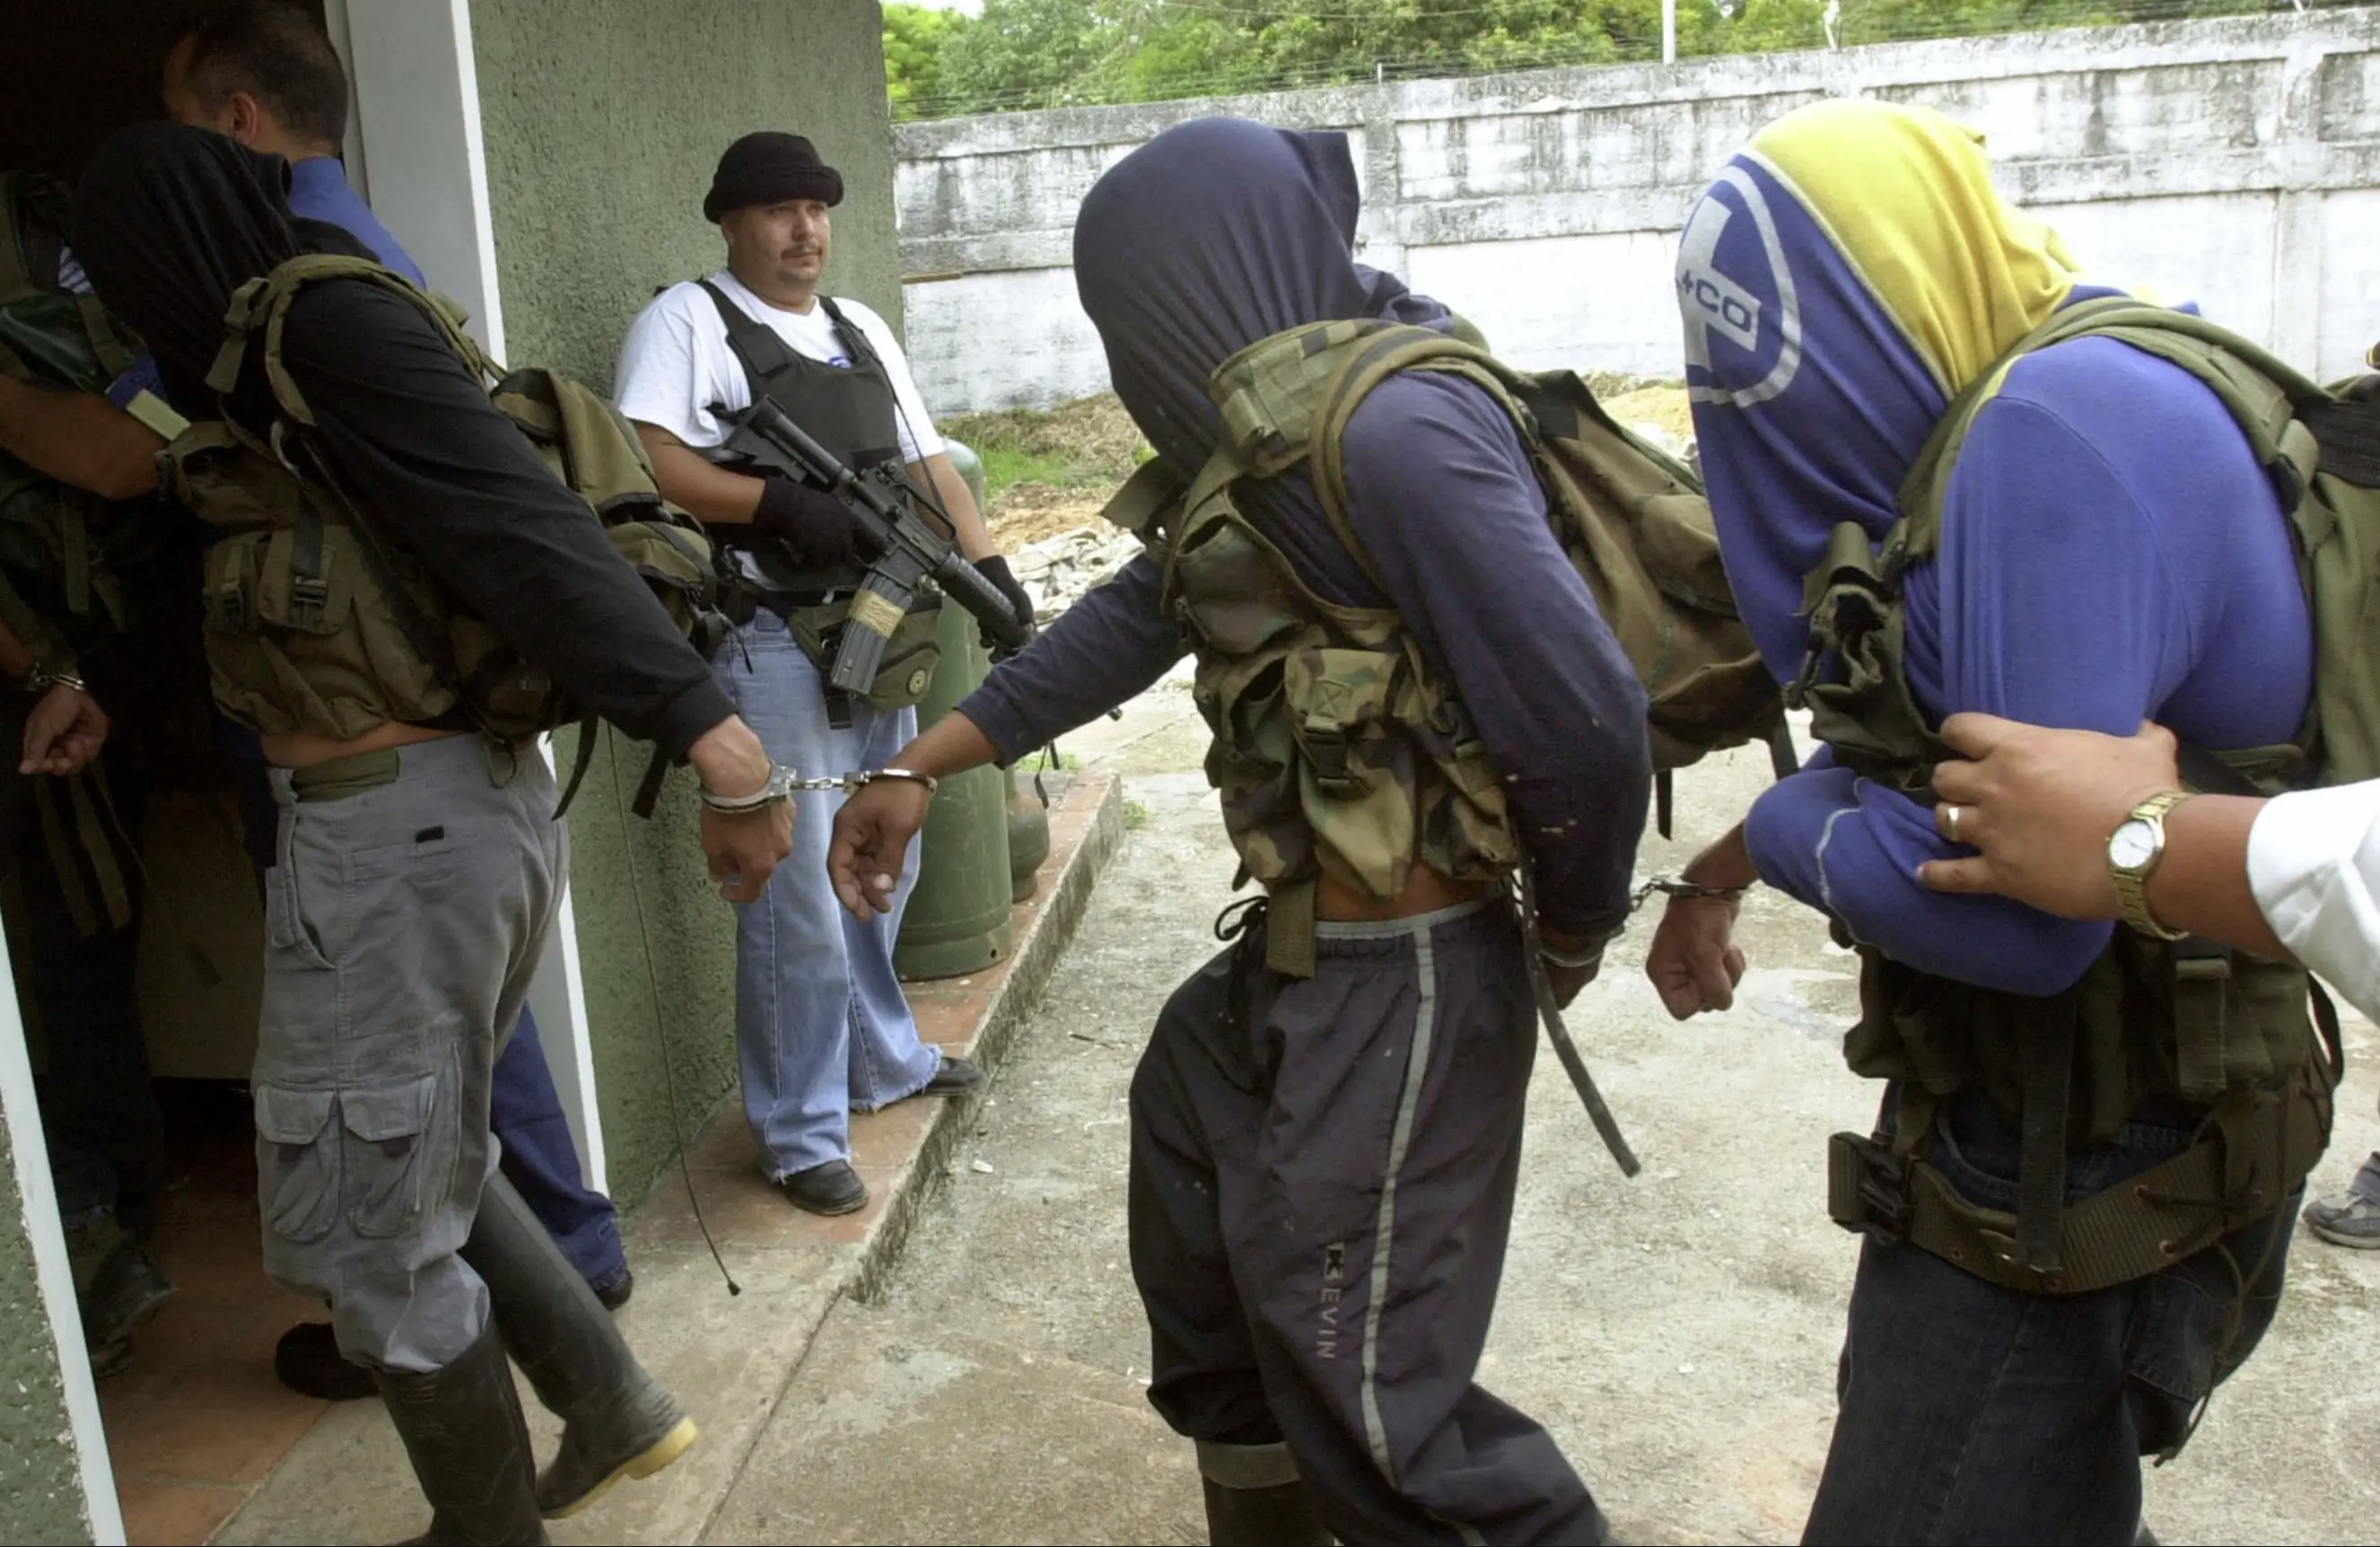 three men, handcuffed to each other and with their faces covered by their own T shirts, are led into a building. An armed man stands at the door